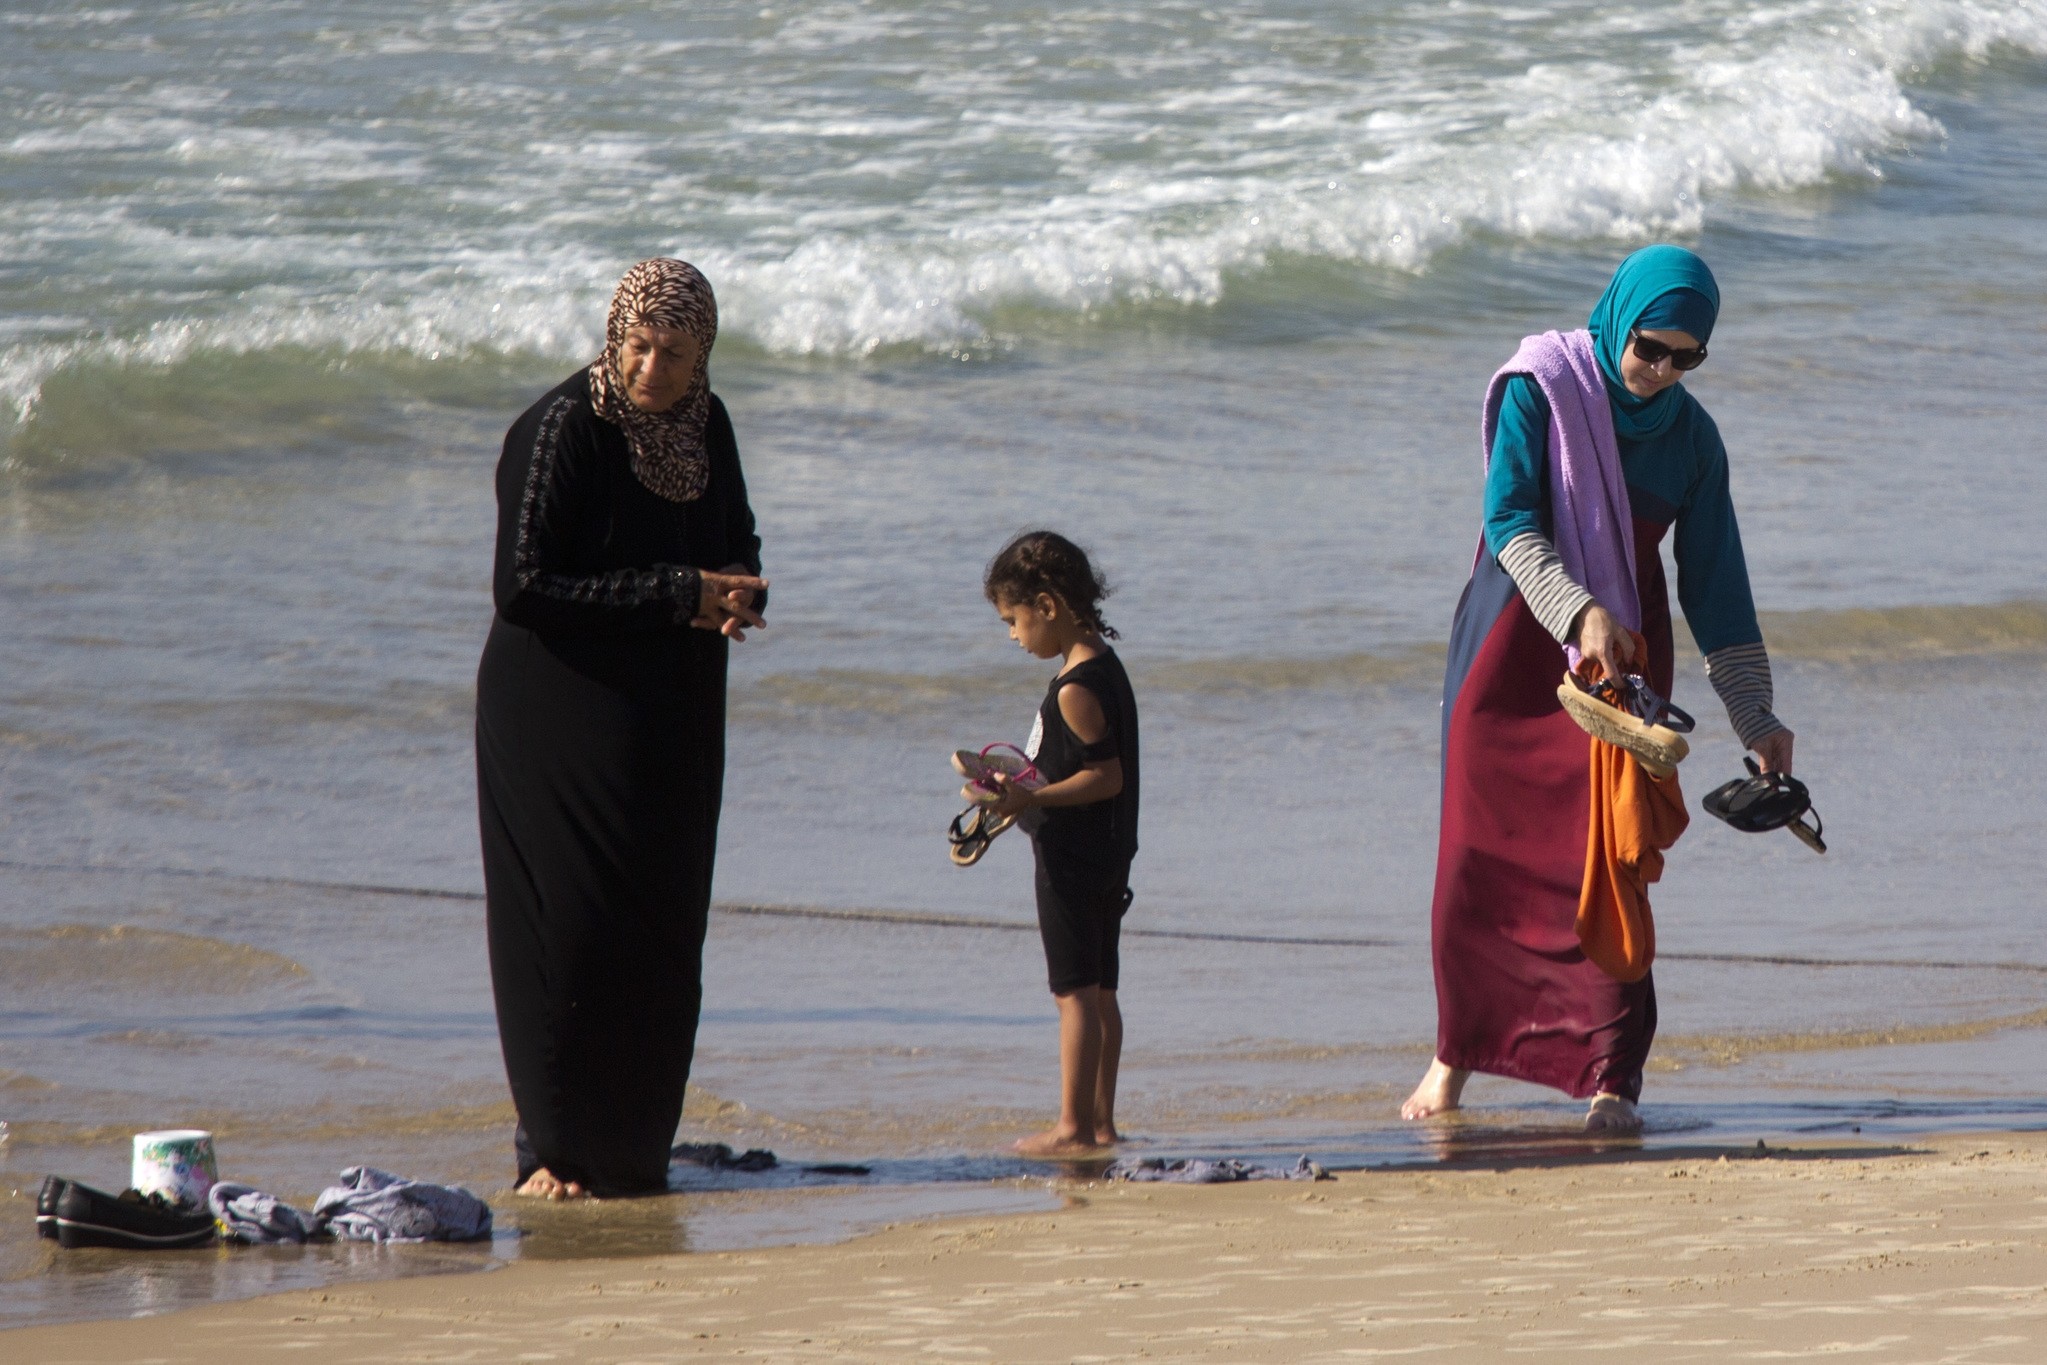 In this Friday, Sept. 2, 2016 photo, Muslim women stand at a beach in Tel Aviv, Israel. (AP Photo)